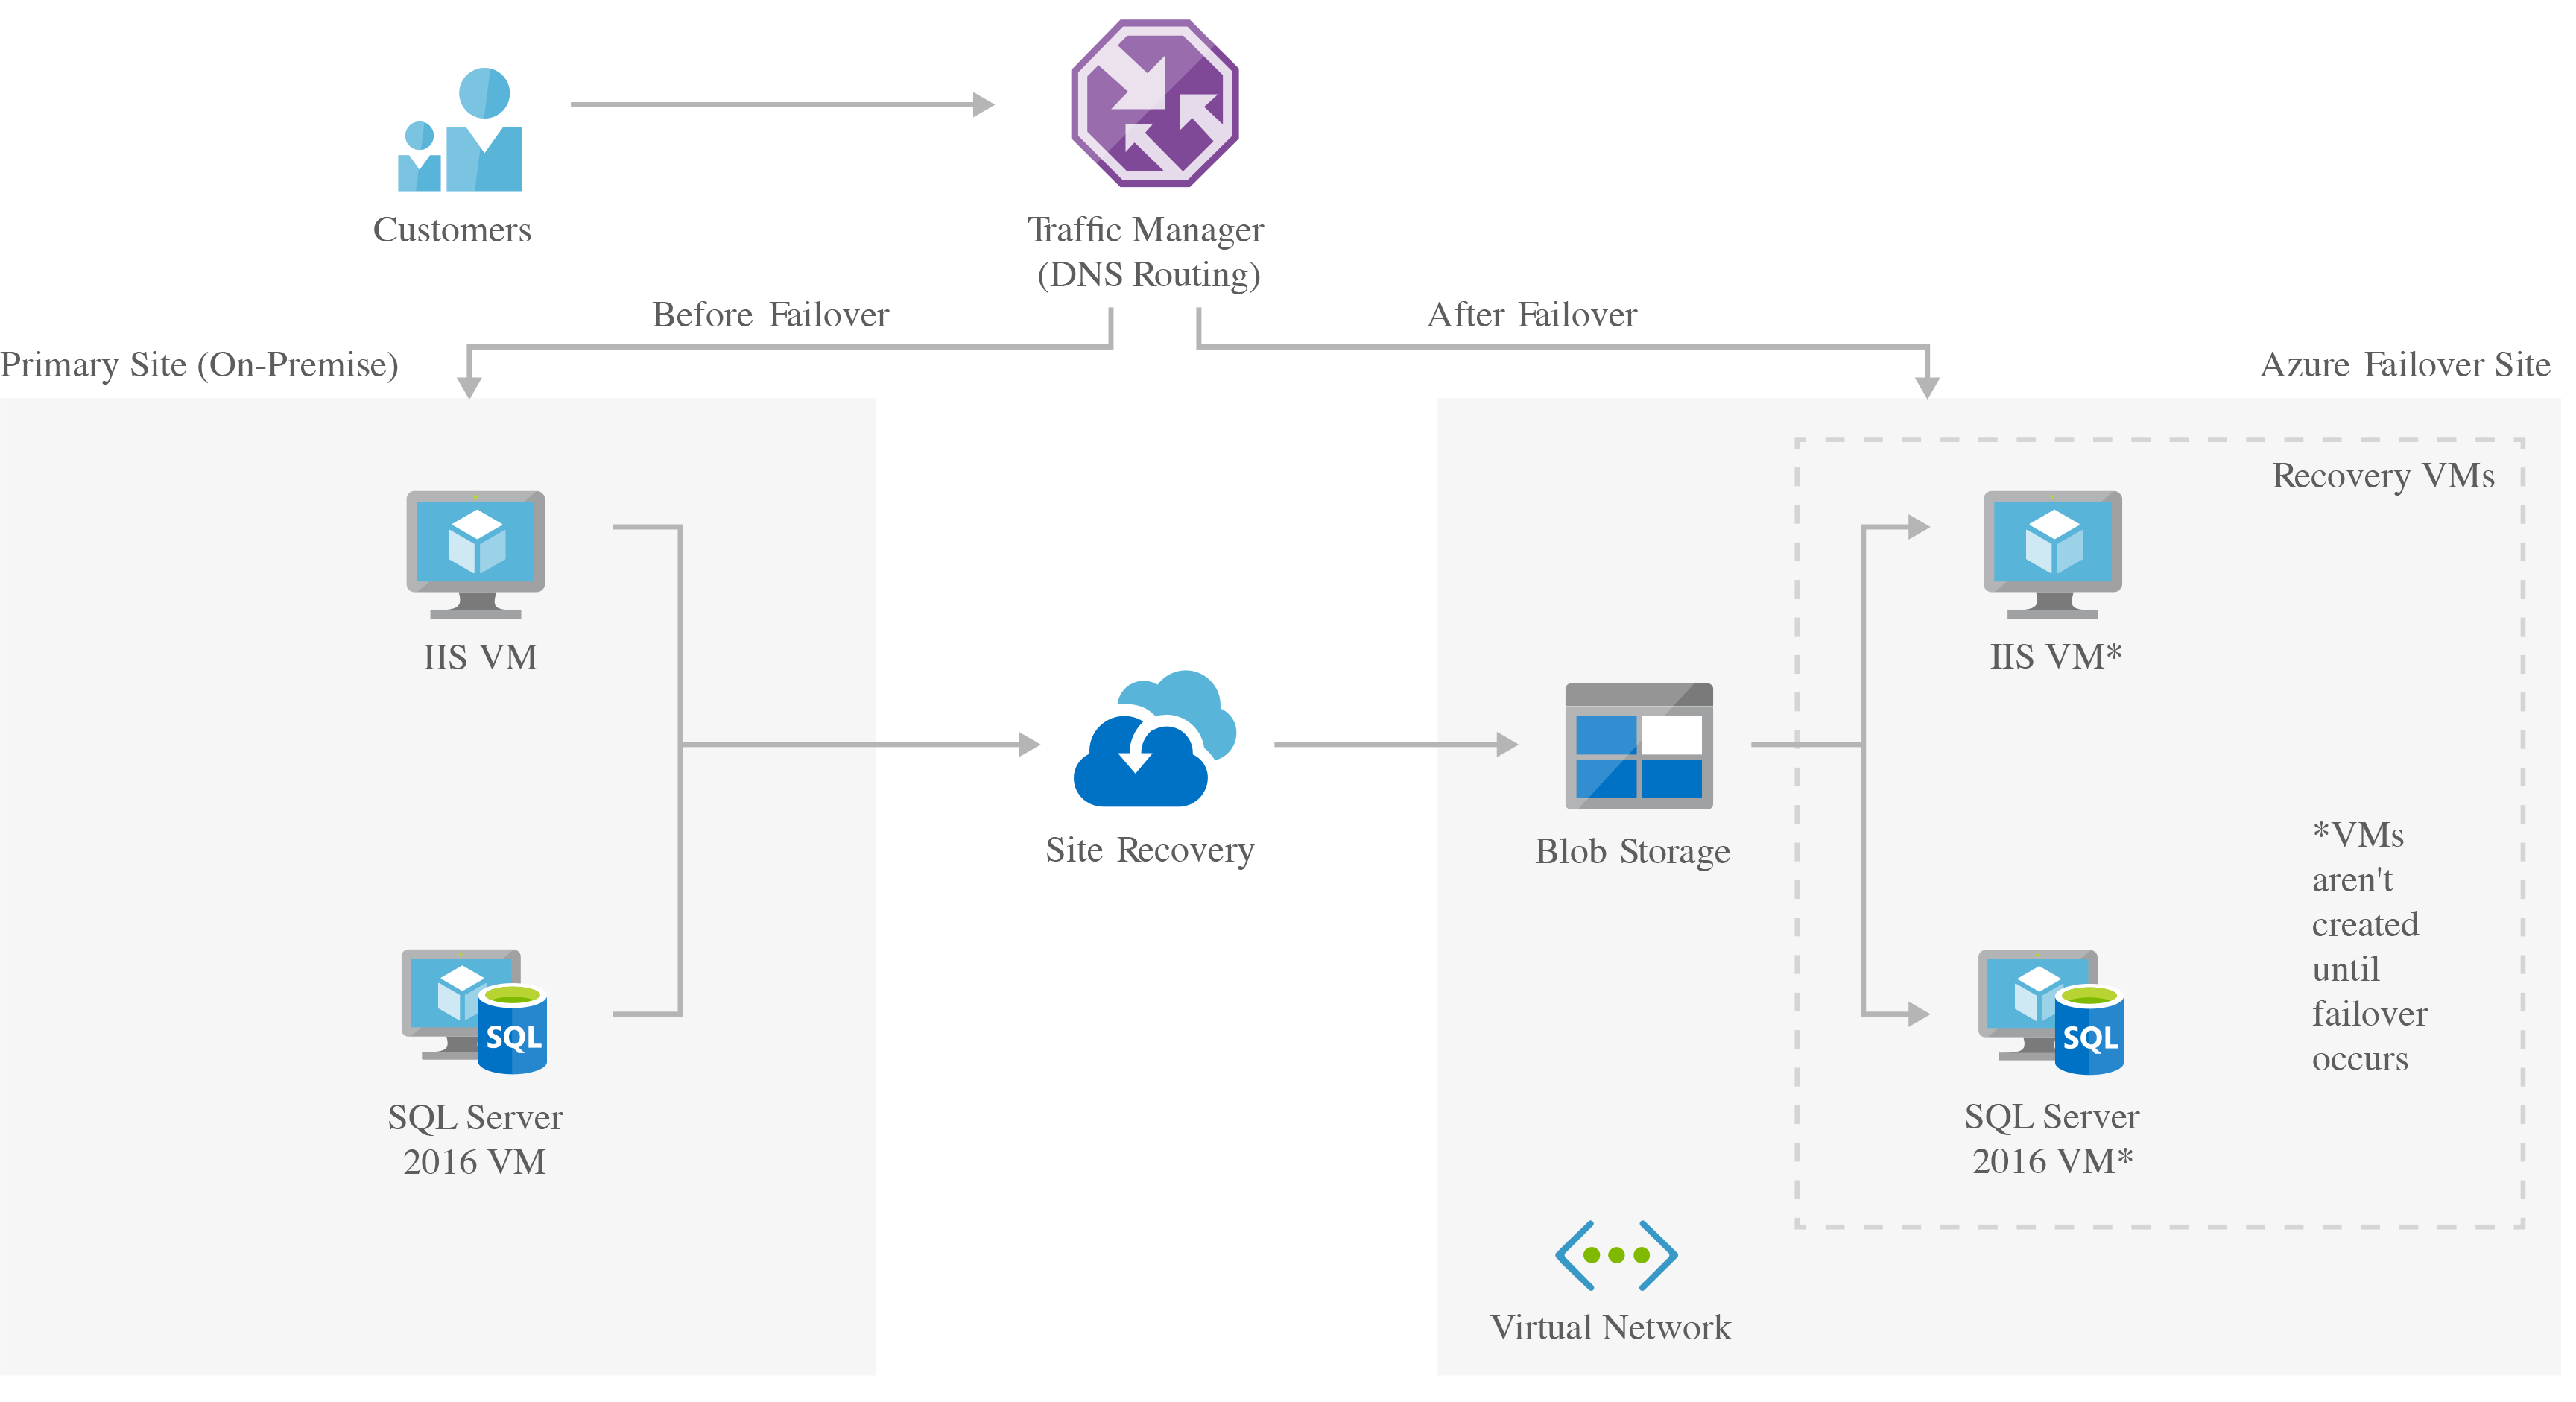 This diagram illustrates a data flow for failover readiness between a "Source environment (East US)" and a "Target environment (Central US)" using Azure services. Here's the description: 1. **Source environment (East US)**: - Contains two **Azure Virtual Machines** that have the "Site recovery extension mobility service" labeled beneath each of them. - Each of these virtual machines is connected to a separate **storage account**. The storage accounts have icons labeled "Disks" indicating storage. - Another storage labeled as "storageaccountcacheasr" with an icon for "Cache data" is connected to one of the Azure Virtual Machines and has a data flow arrow pointing upwards. - Both virtual machines are encompassed within a dotted line box labeled "Availability set" and "Subnet1", indicating they are part of the same subnet and availability set. - At the bottom, there's an icon indicating "VNet", suggesting the entire setup is within a virtual network. 2. **Data flow**: - An arrow labeled "Data flow" moves from the "Cache data" in the Source environment to the "Failover ready" block. - Another "Data flow" arrow moves from the "Failover ready" block to the Target environment. 3. **Target environment (Central US)**: - Contains a **storage account** labeled "storageaccountasr" with two icons indicating "Disks". - The entire storage setup is encompassed within a dotted line box labeled "Availability set" and "Subnet1", suggesting it's part of a subnet and availability set. - The storage account is ready for data, which is indicated by a block labeled "Failover ready". - At the bottom, there's an icon indicating "VNet", suggesting the entire setup is within a virtual network. Overall, the diagram showcases the infrastructure in place for failover readiness from a source to a target environment using Azure Virtual Machines, Storage Accounts, and Networking components.